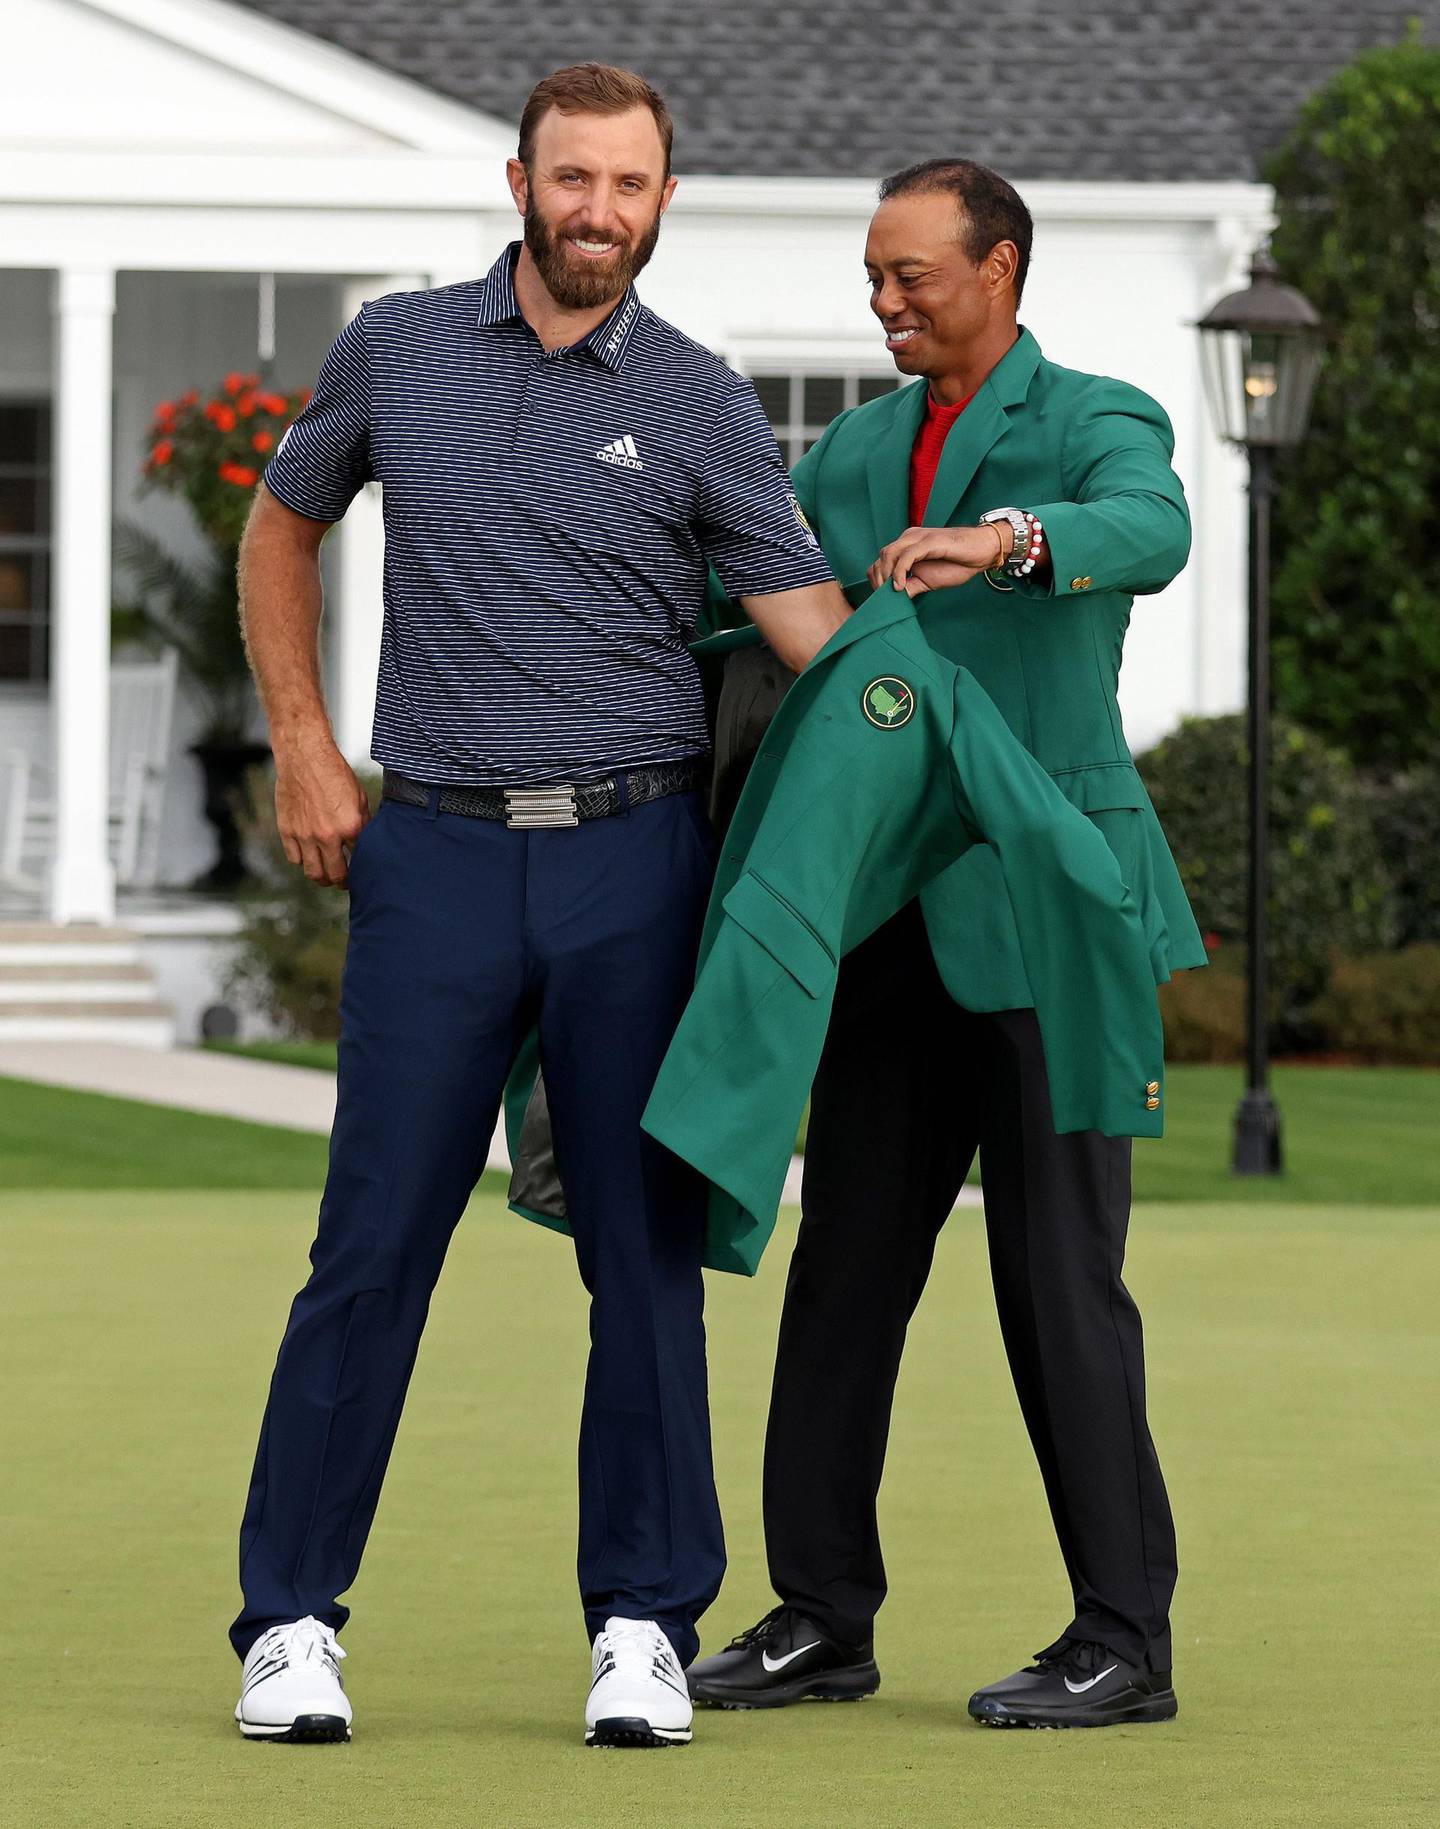 AUGUSTA, GEORGIA - NOVEMBER 15: Dustin Johnson of the United States is awarded the Green Jacket by Masters champion Tiger Woods of the United States during the Green Jacket Ceremony after winning the Masters at Augusta National Golf Club on November 15, 2020 in Augusta, Georgia.   Jamie Squire/Getty Images/AFP
== FOR NEWSPAPERS, INTERNET, TELCOS & TELEVISION USE ONLY ==
